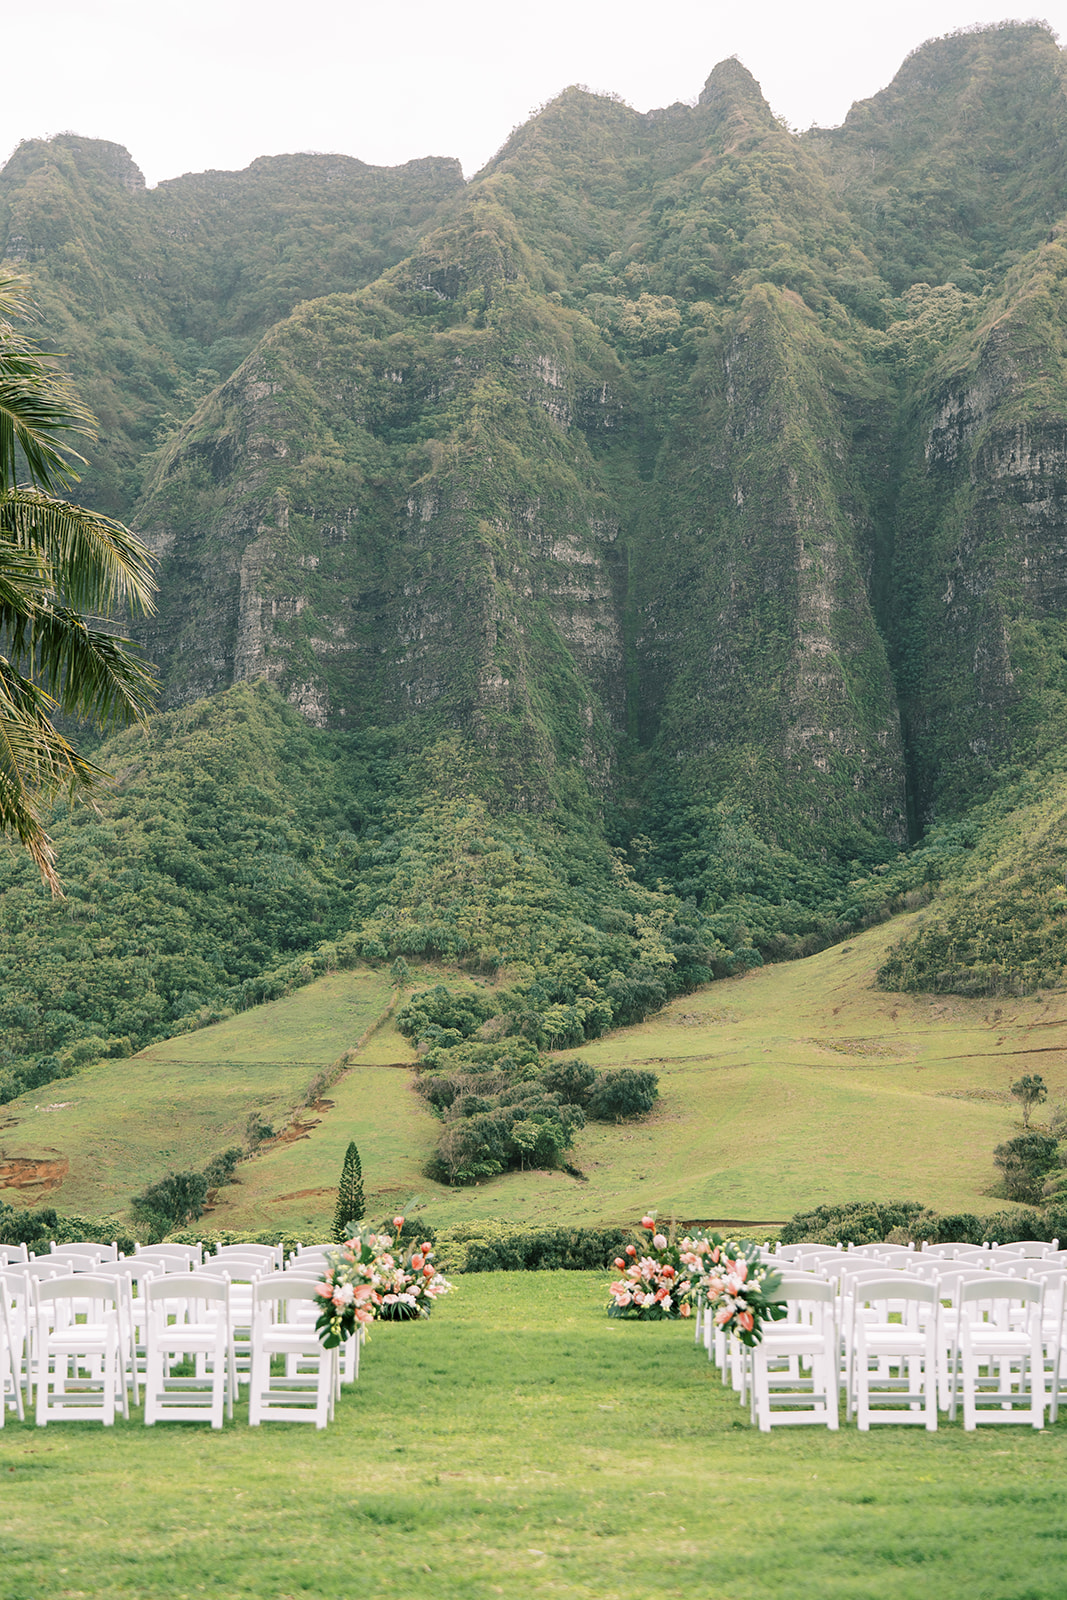 A Destination Wedding ceremony set up in the grass with mountains in the background at Kualoa Ranch.